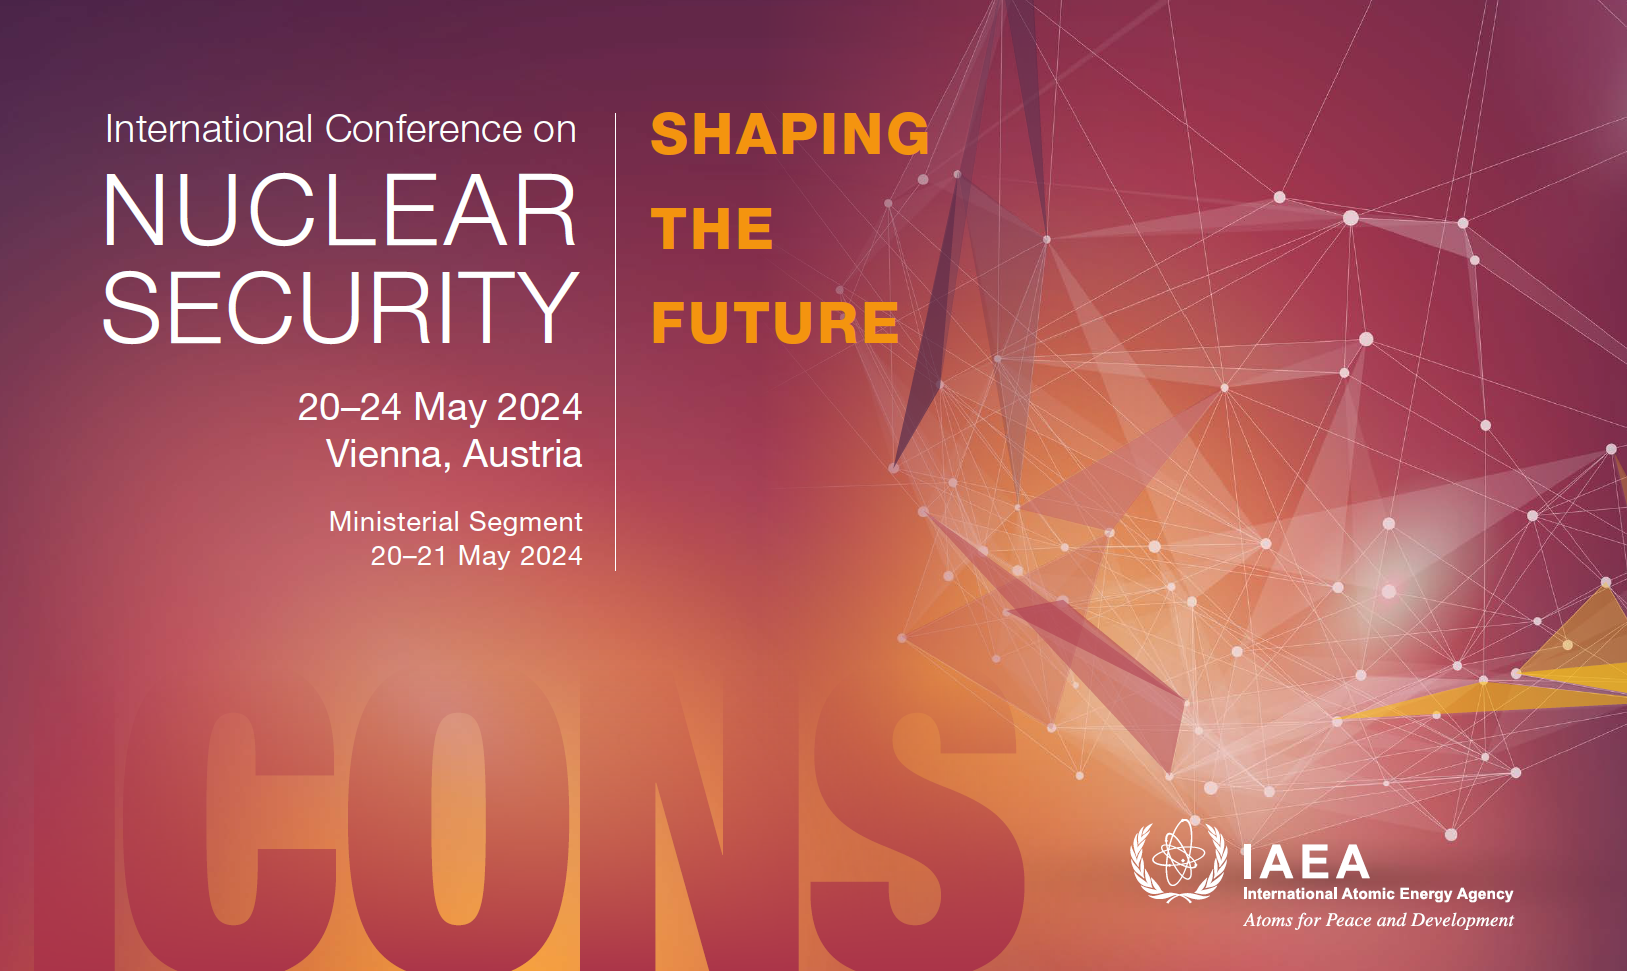 Graphic with IAEA seal and logo at the bottom right corner and the words: International Conference on Nuclear Security 20-24 May, 2024 Vienna, Austria Ministerial Segment 20-21 May 2024 Shaping the Future ICONS